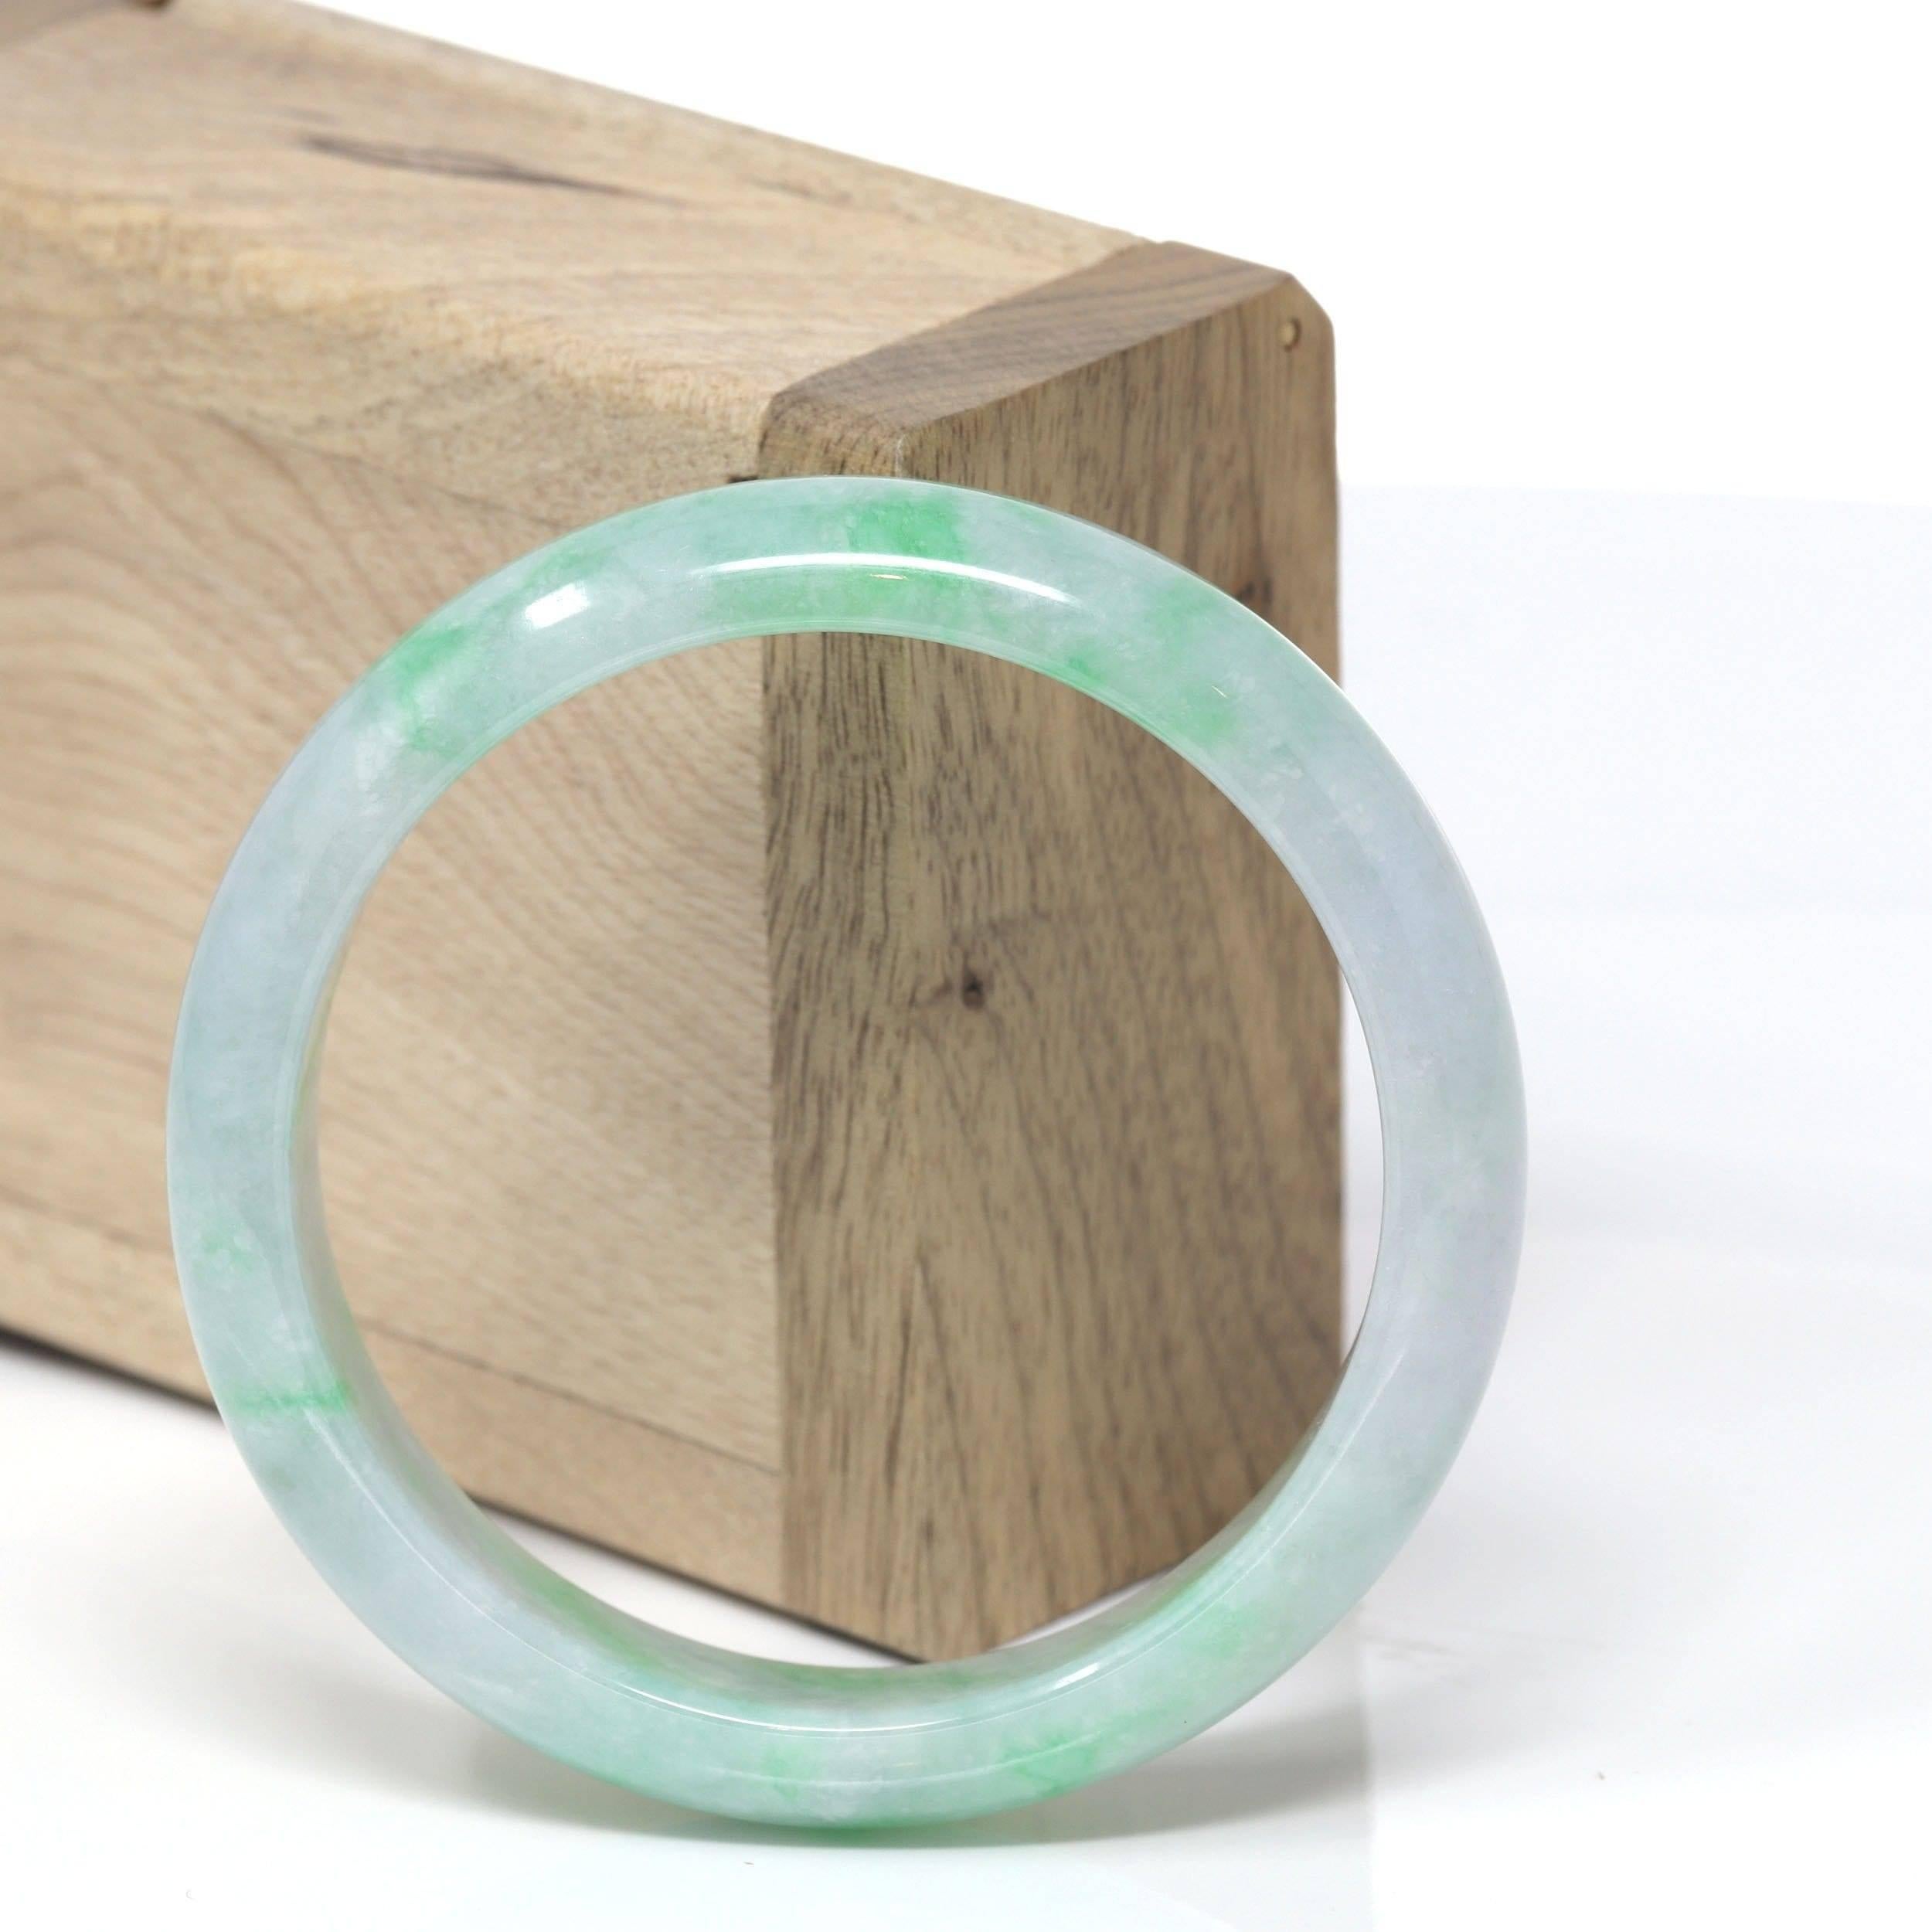 * DETAILS--- Genuine Burmese Jadeite Jade Bangle Bracelet. This bangle is made with high-quality genuine Burmese ice-green Jadeite jade, the jade texture is transparent with green & lavender colors inside. The green color and transparency lavender